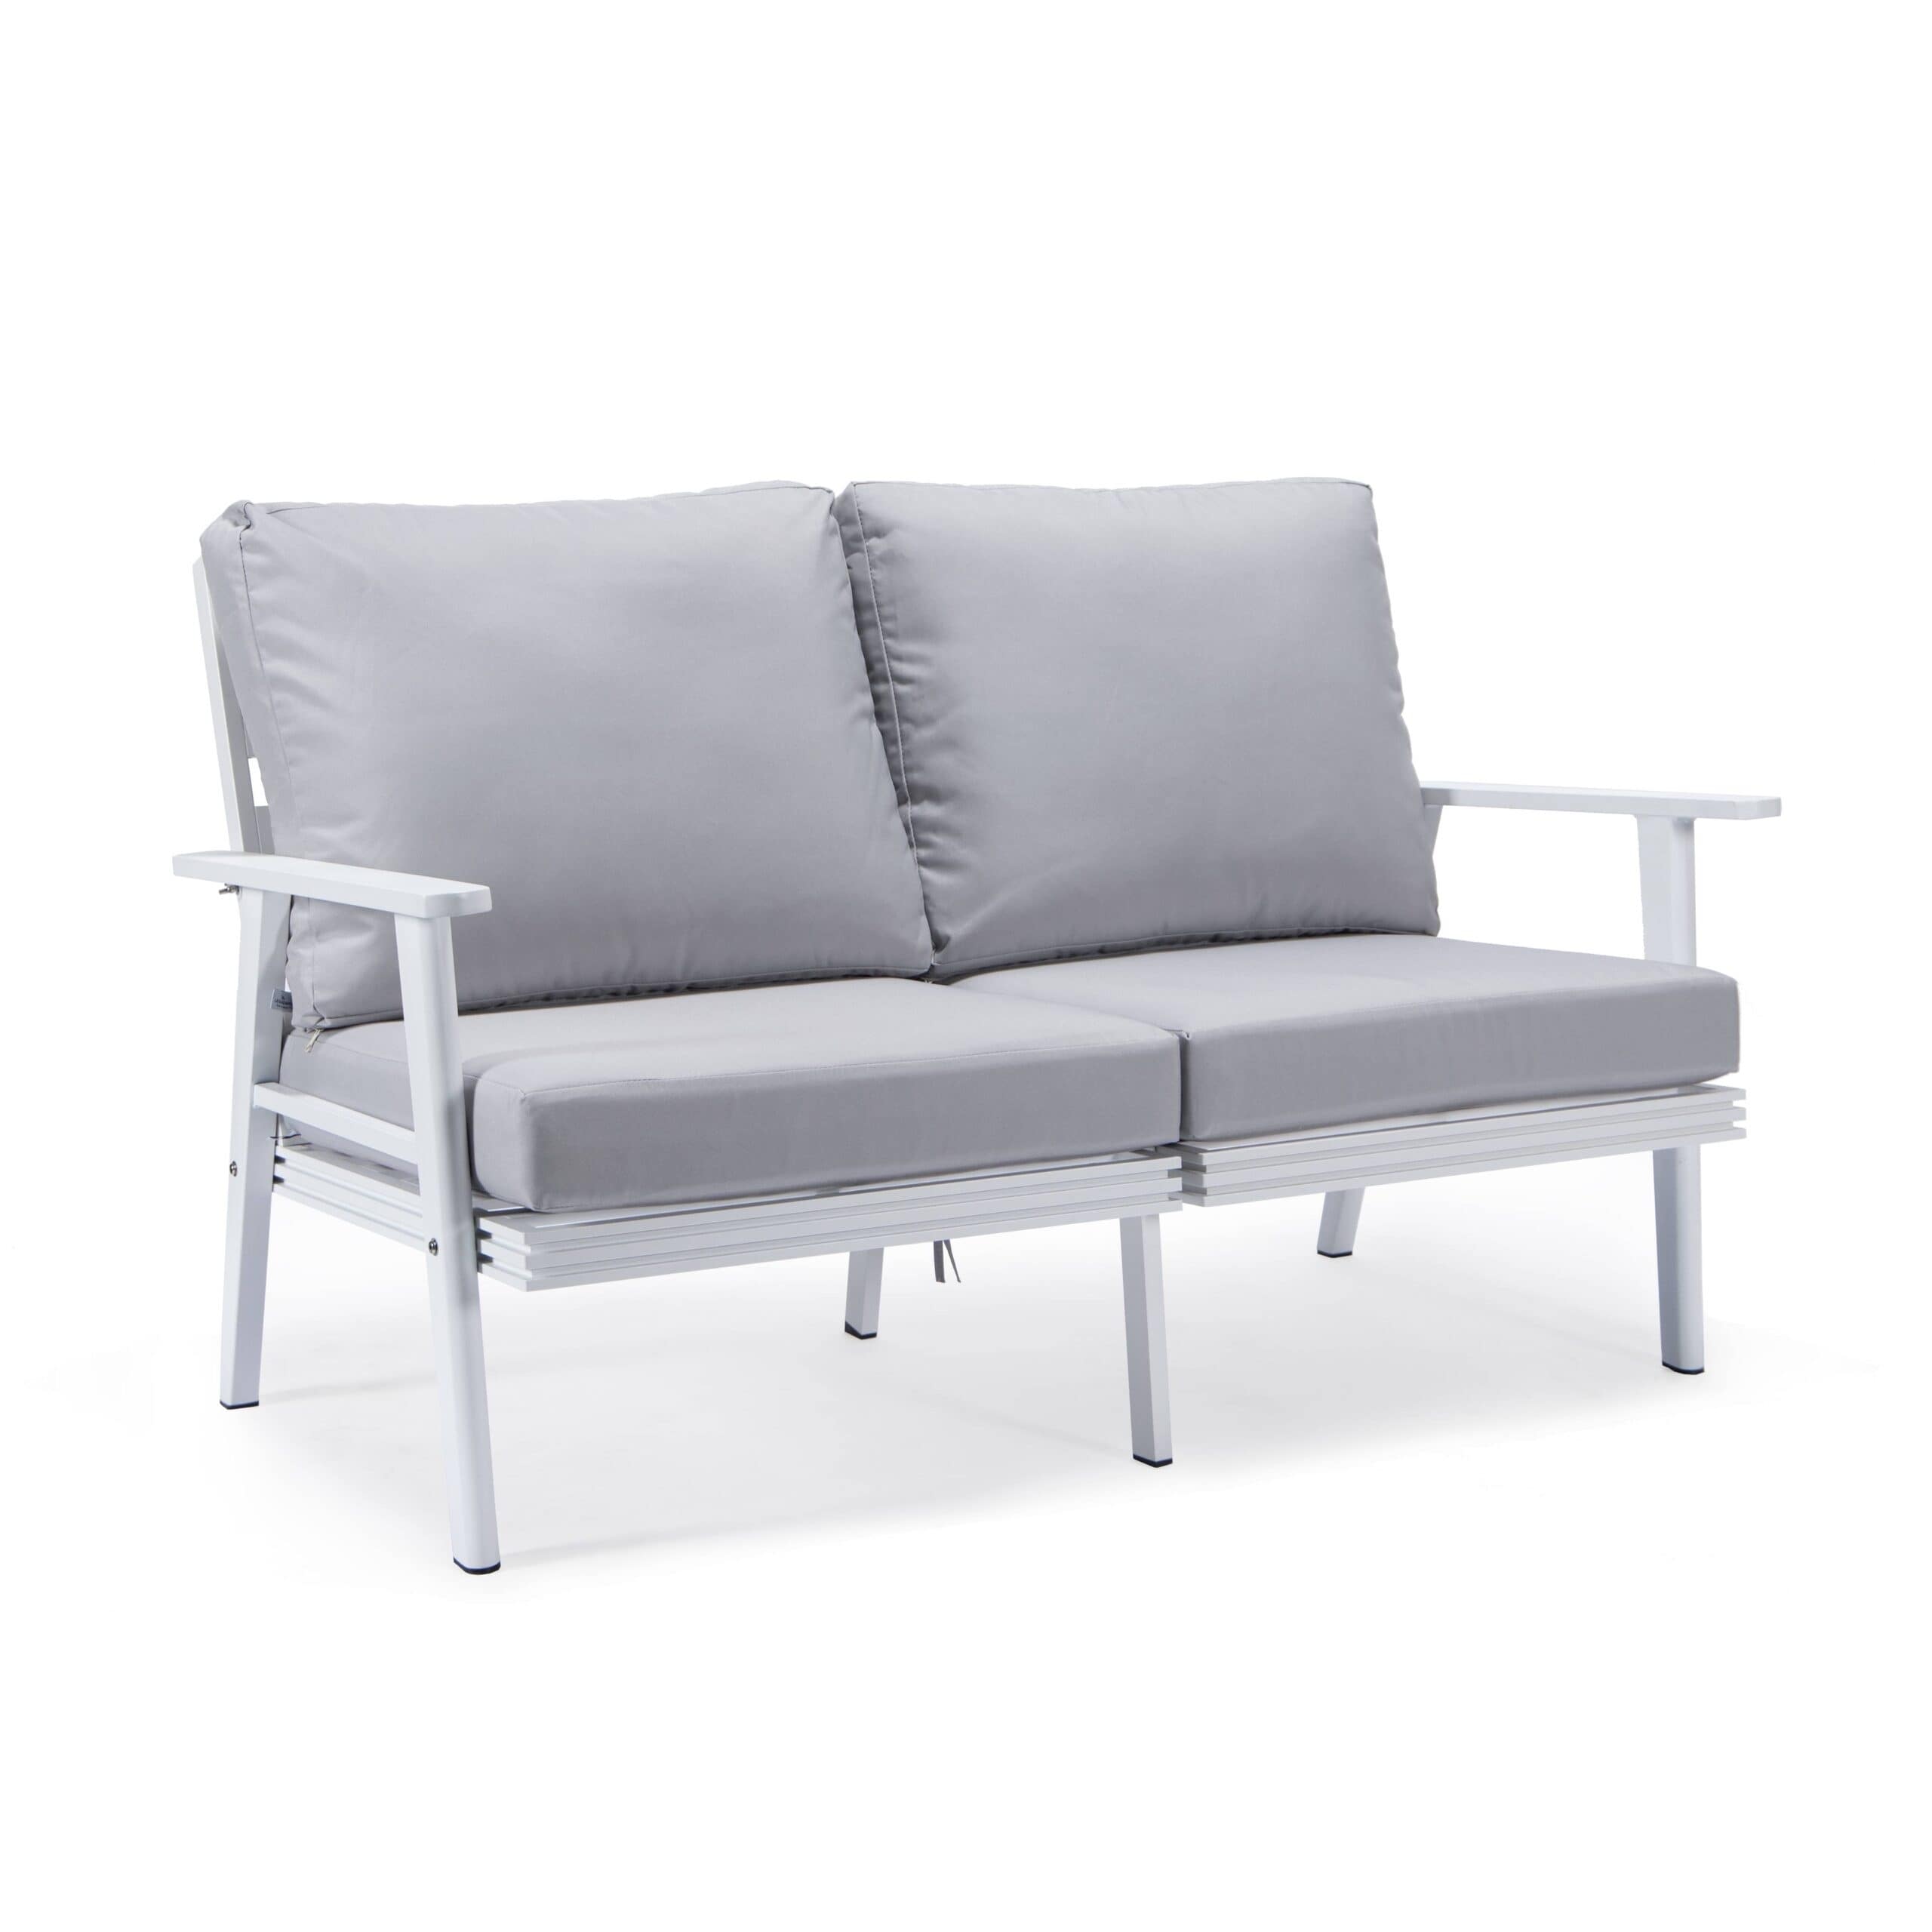 Leisuremod Walbrooke Patio Loveseat With White Aluminum Frame And Removable Cushions - 56.69